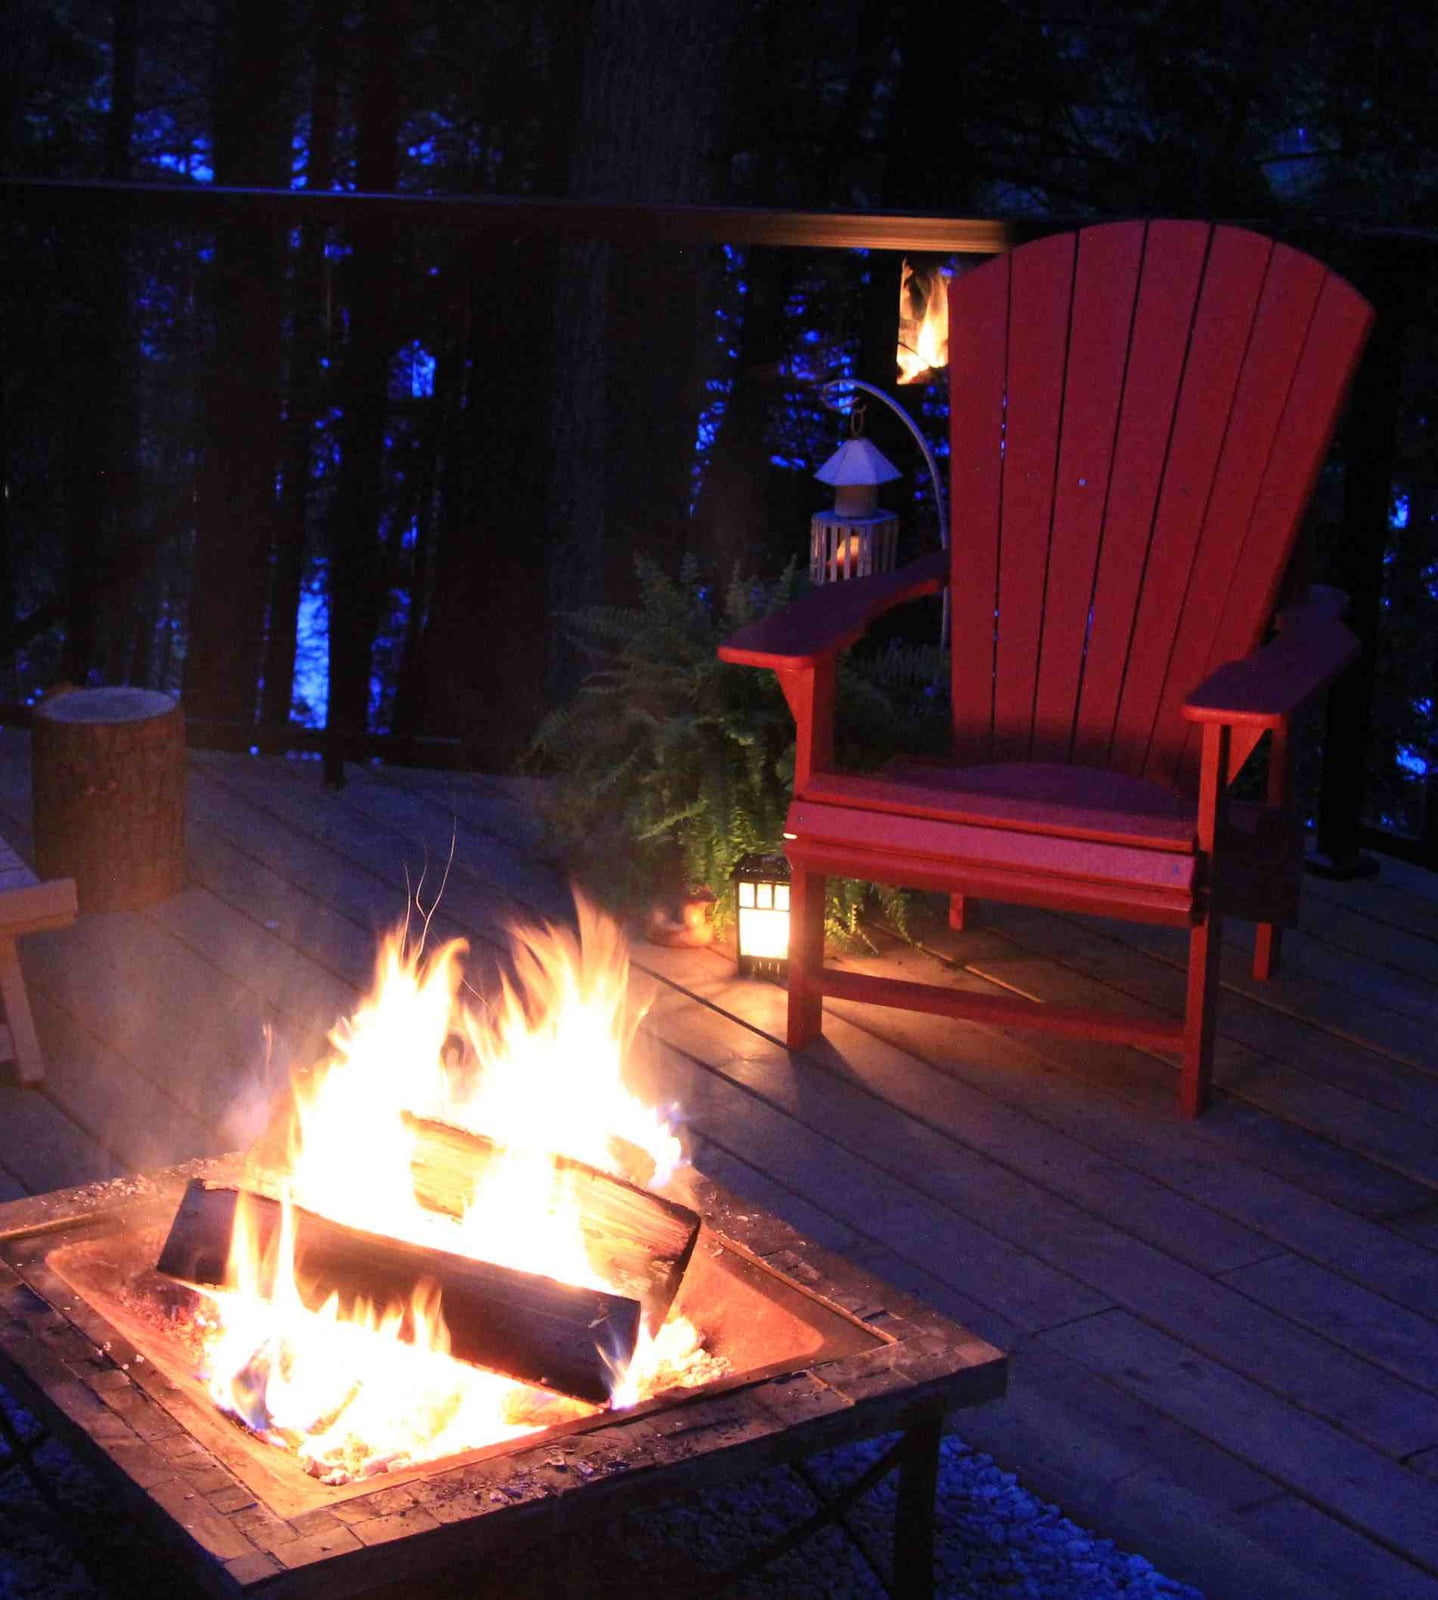 Bring on the heat! Outdoor fireplace tips and tricks